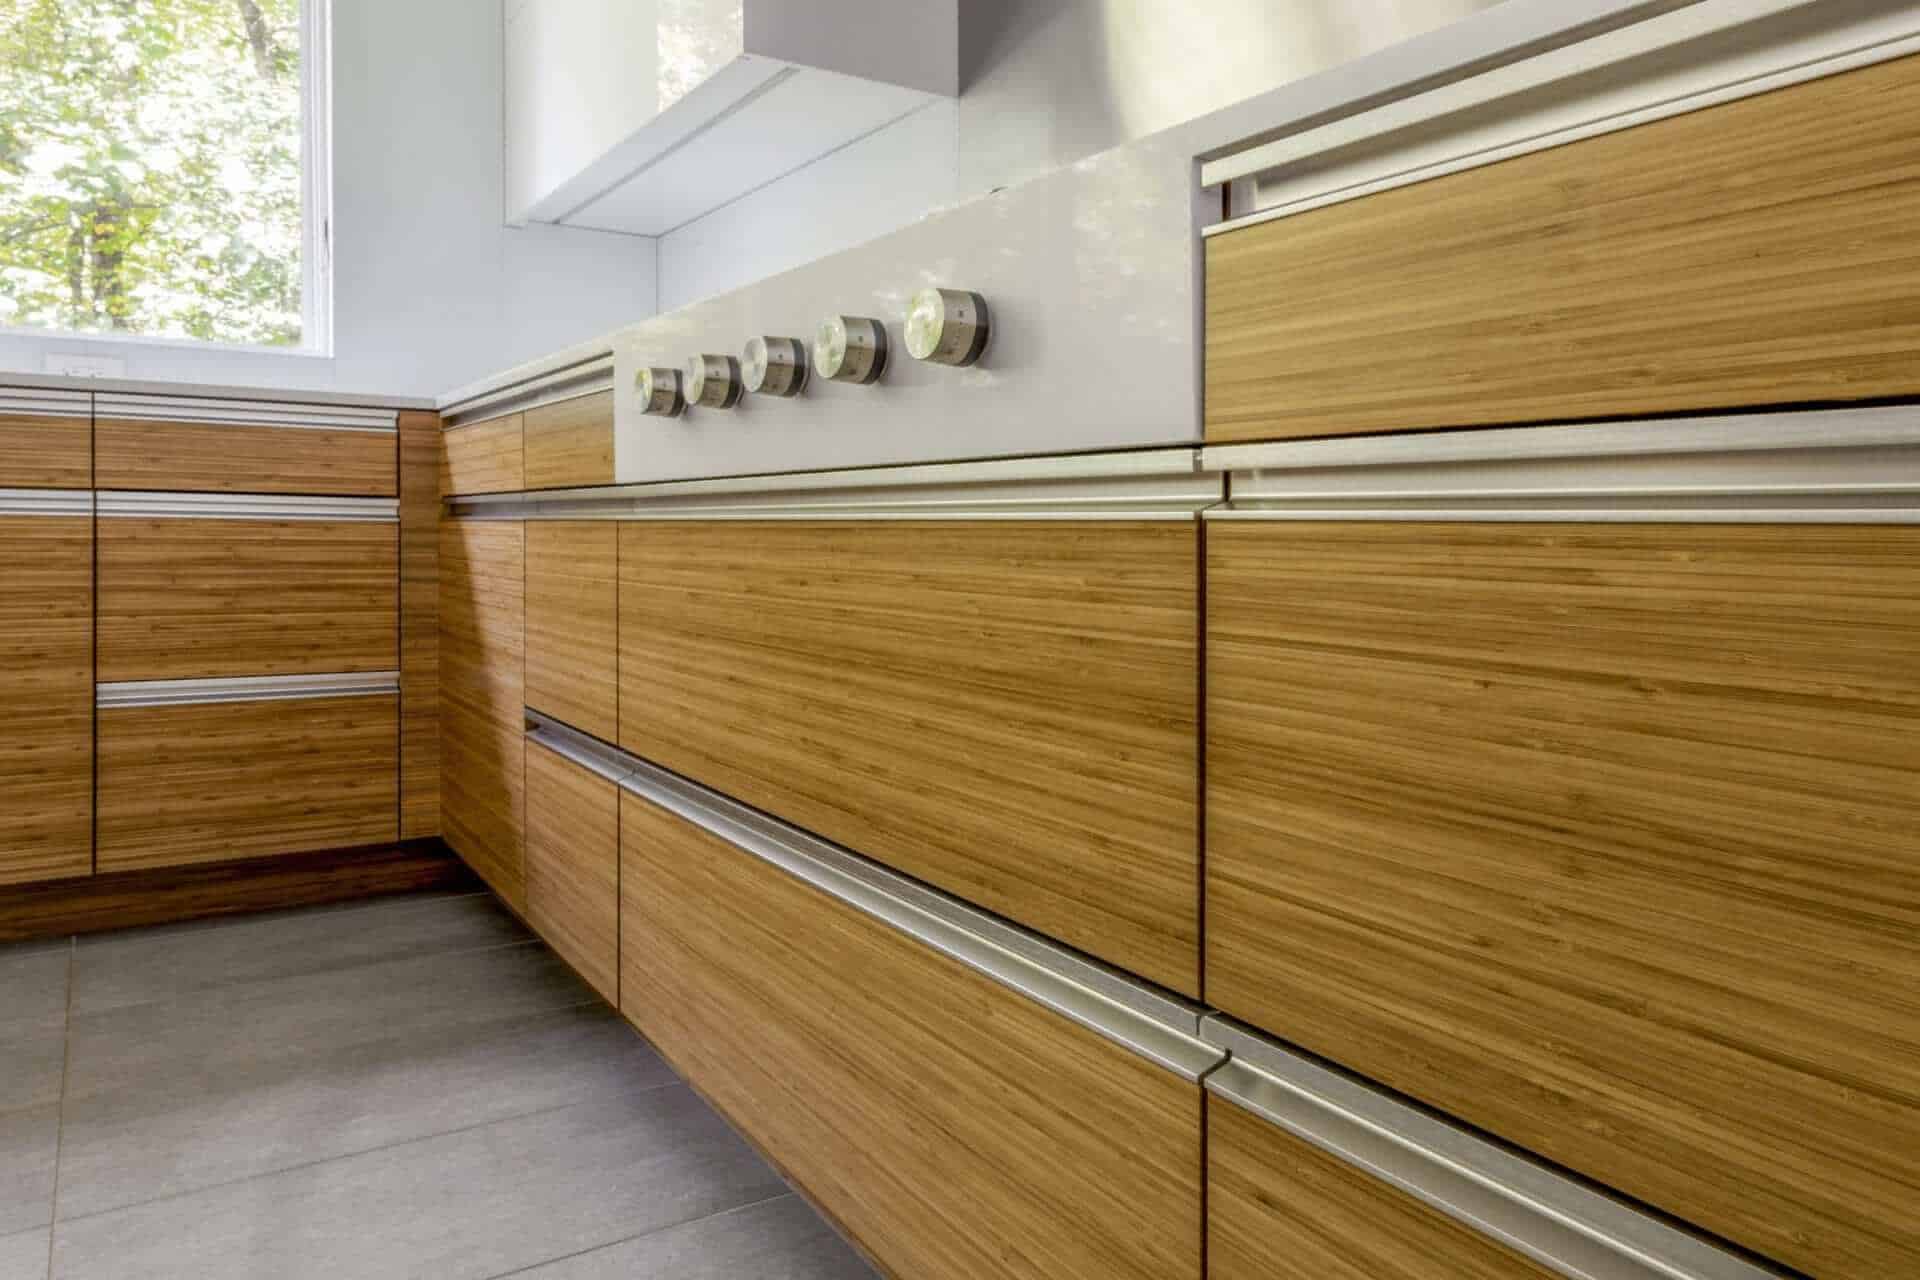 Clean, modern kitchen features NAC cabinets in both bamboo with caramel stain and white gloss, grey flooring and stainless channel hardware.